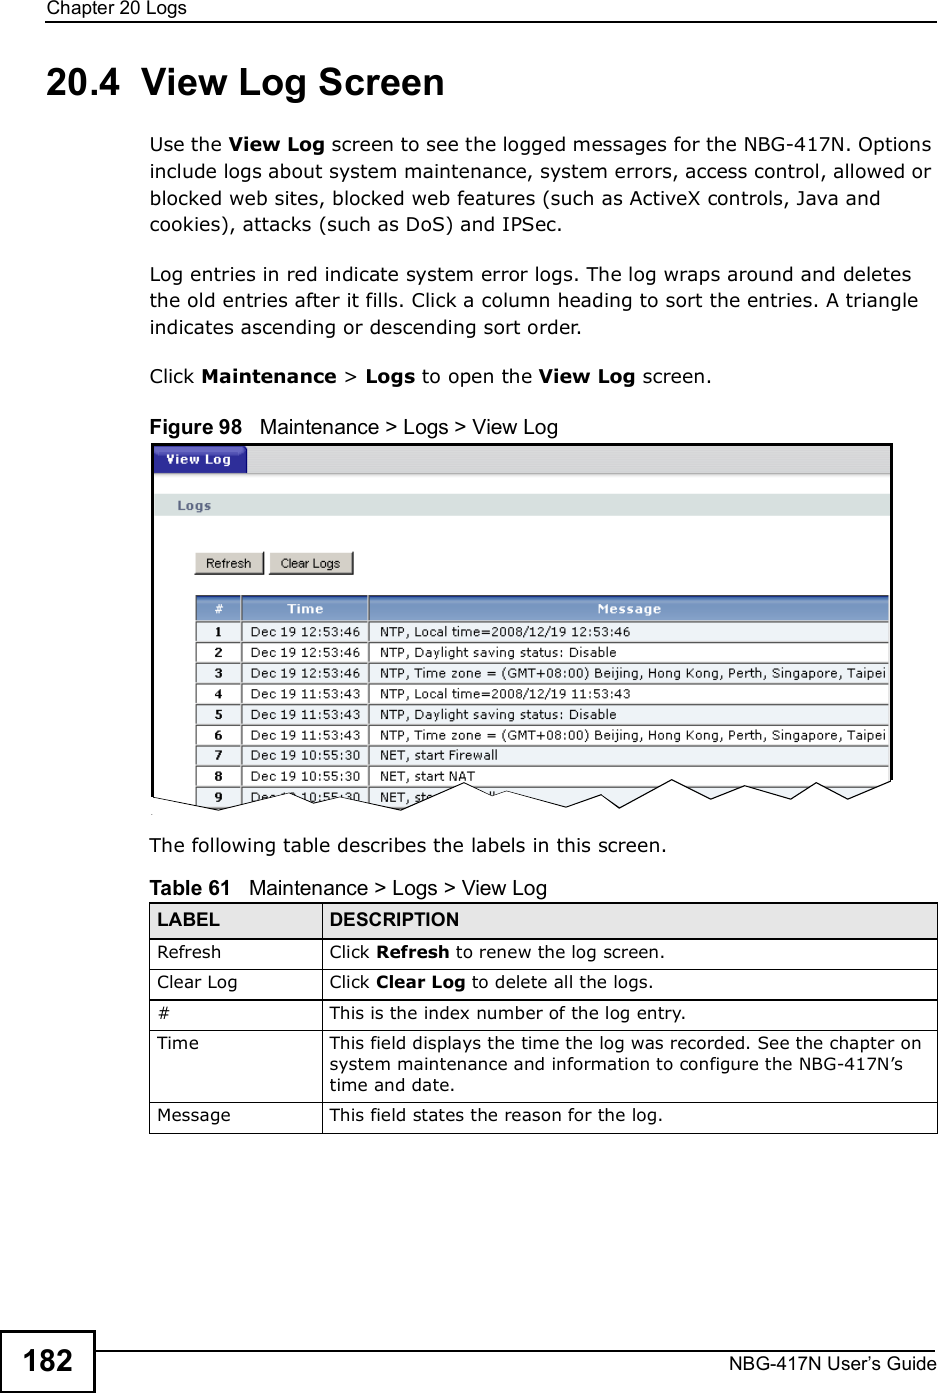 Chapter 20LogsNBG-417N User s Guide18220.4  View Log ScreenUse the View Log screen to see the logged messages for the NBG-417N. Options include logs about system maintenance, system errors, access control, allowed or blocked web sites, blocked web features (such as ActiveX controls, Java and cookies), attacks (such as DoS) and IPSec.Log entries in red indicate system error logs. The log wraps around and deletes the old entries after it fills. Click a column heading to sort the entries. A triangle indicates ascending or descending sort order. Click Maintenance &gt; Logs to open the View Log screen.Figure 98   Maintenance &gt; Logs &gt; View Log The following table describes the labels in this screen.Table 61   Maintenance &gt; Logs &gt; View LogLABEL DESCRIPTIONRefresh Click Refresh to renew the log screen. Clear Log  Click Clear Log to delete all the logs. #This is the index number of the log entry.Time  This field displays the time the log was recorded. See the chapter on system maintenance and information to configure the NBG-417N!s time and date.Message This field states the reason for the log.